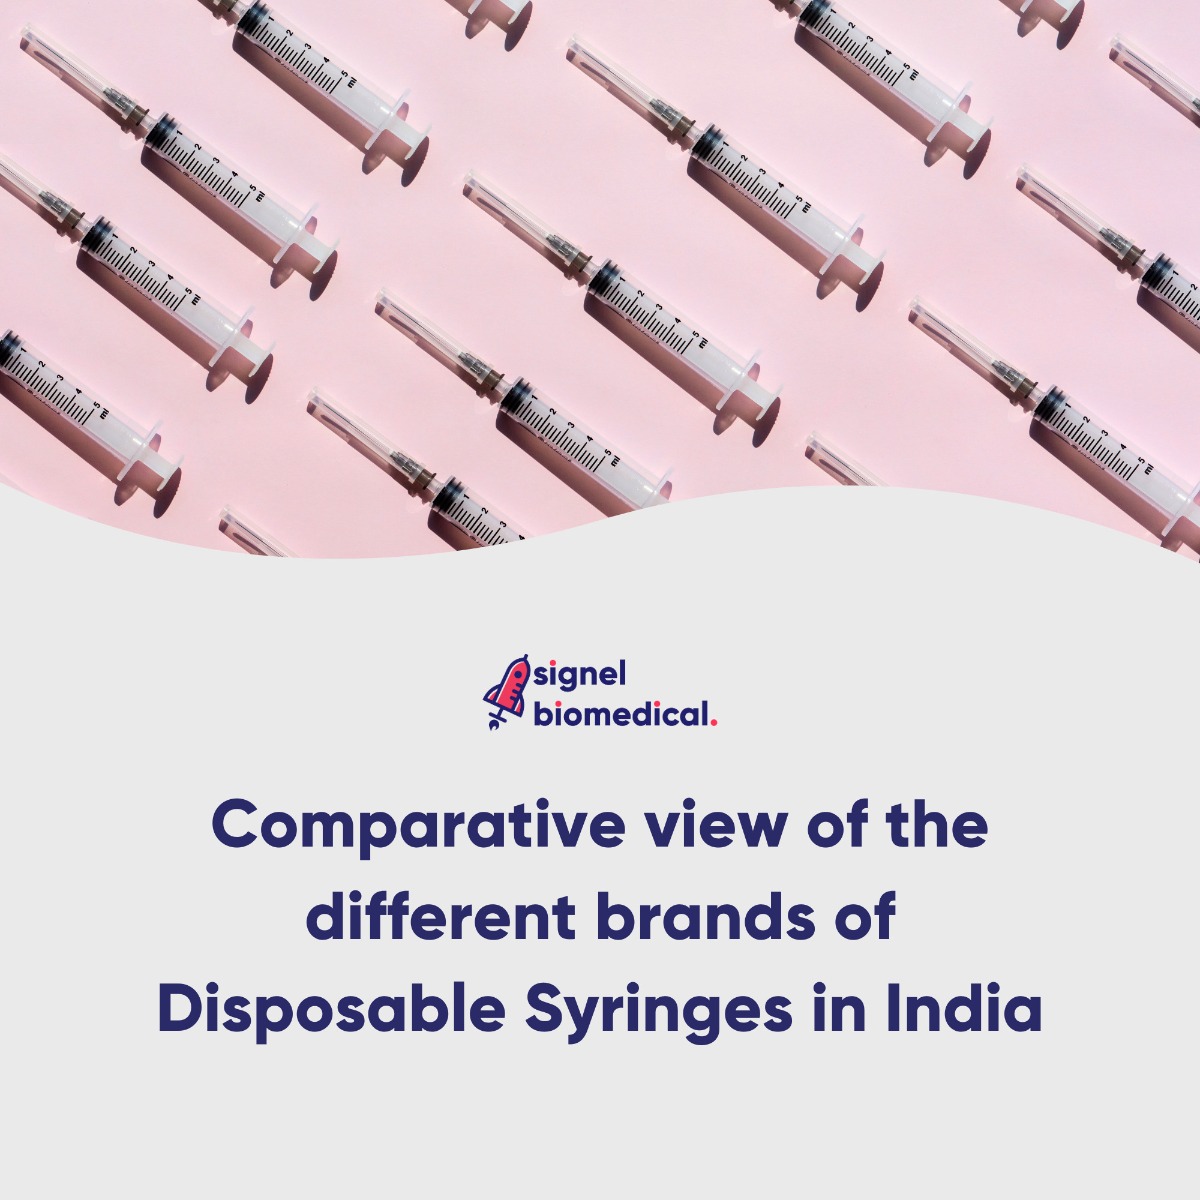 brands of disposable syringes available in the India